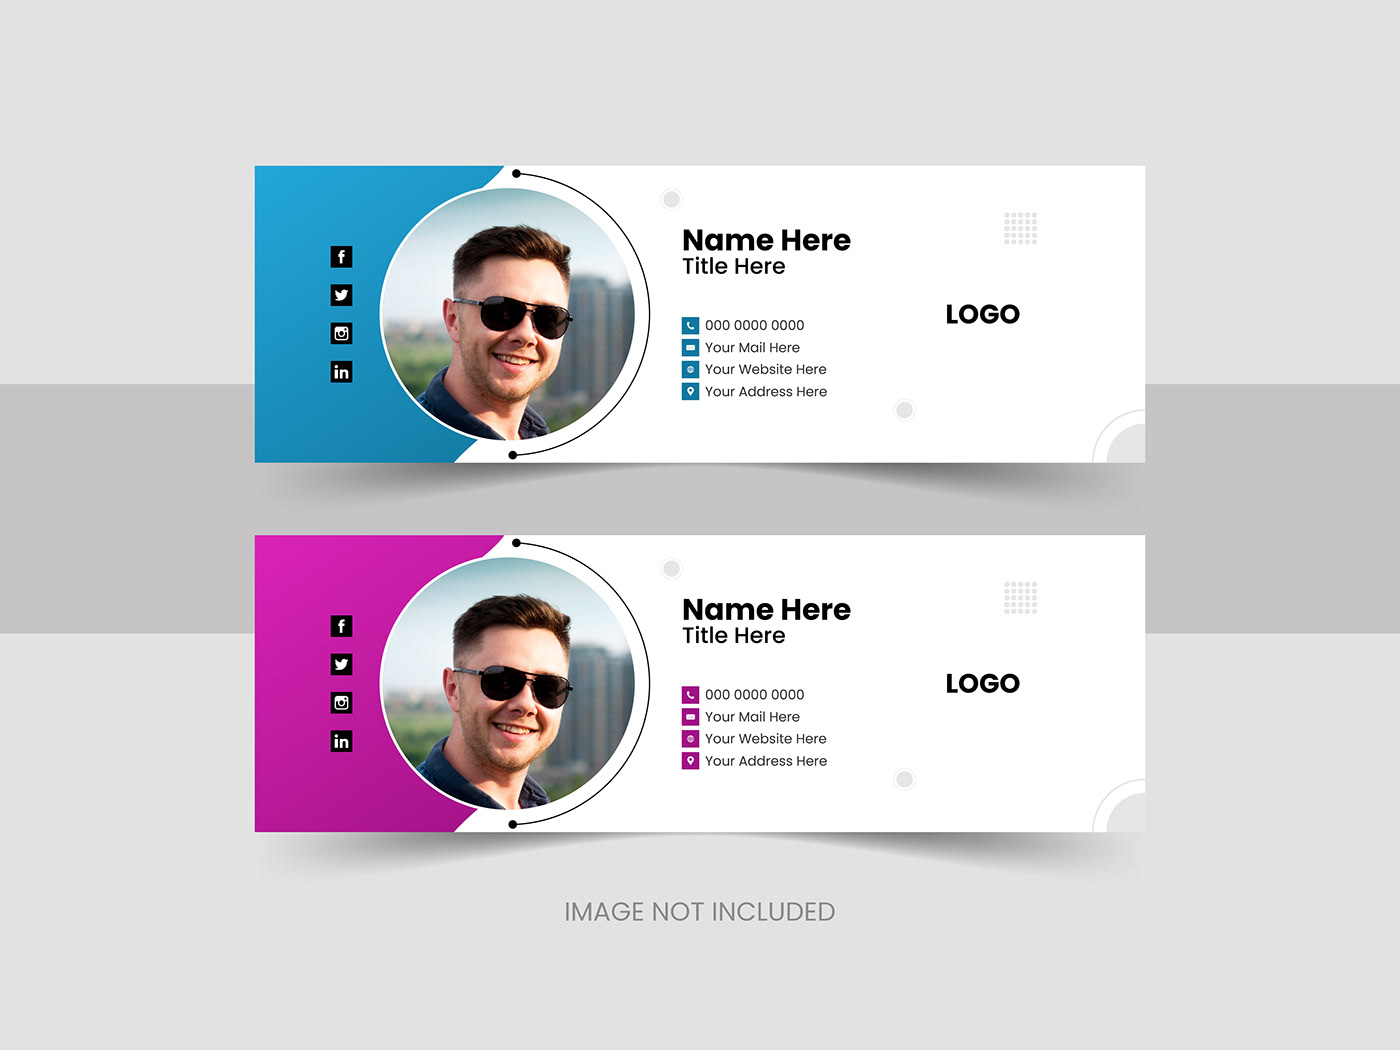 Email signature business Web design template vector banner Layout creative